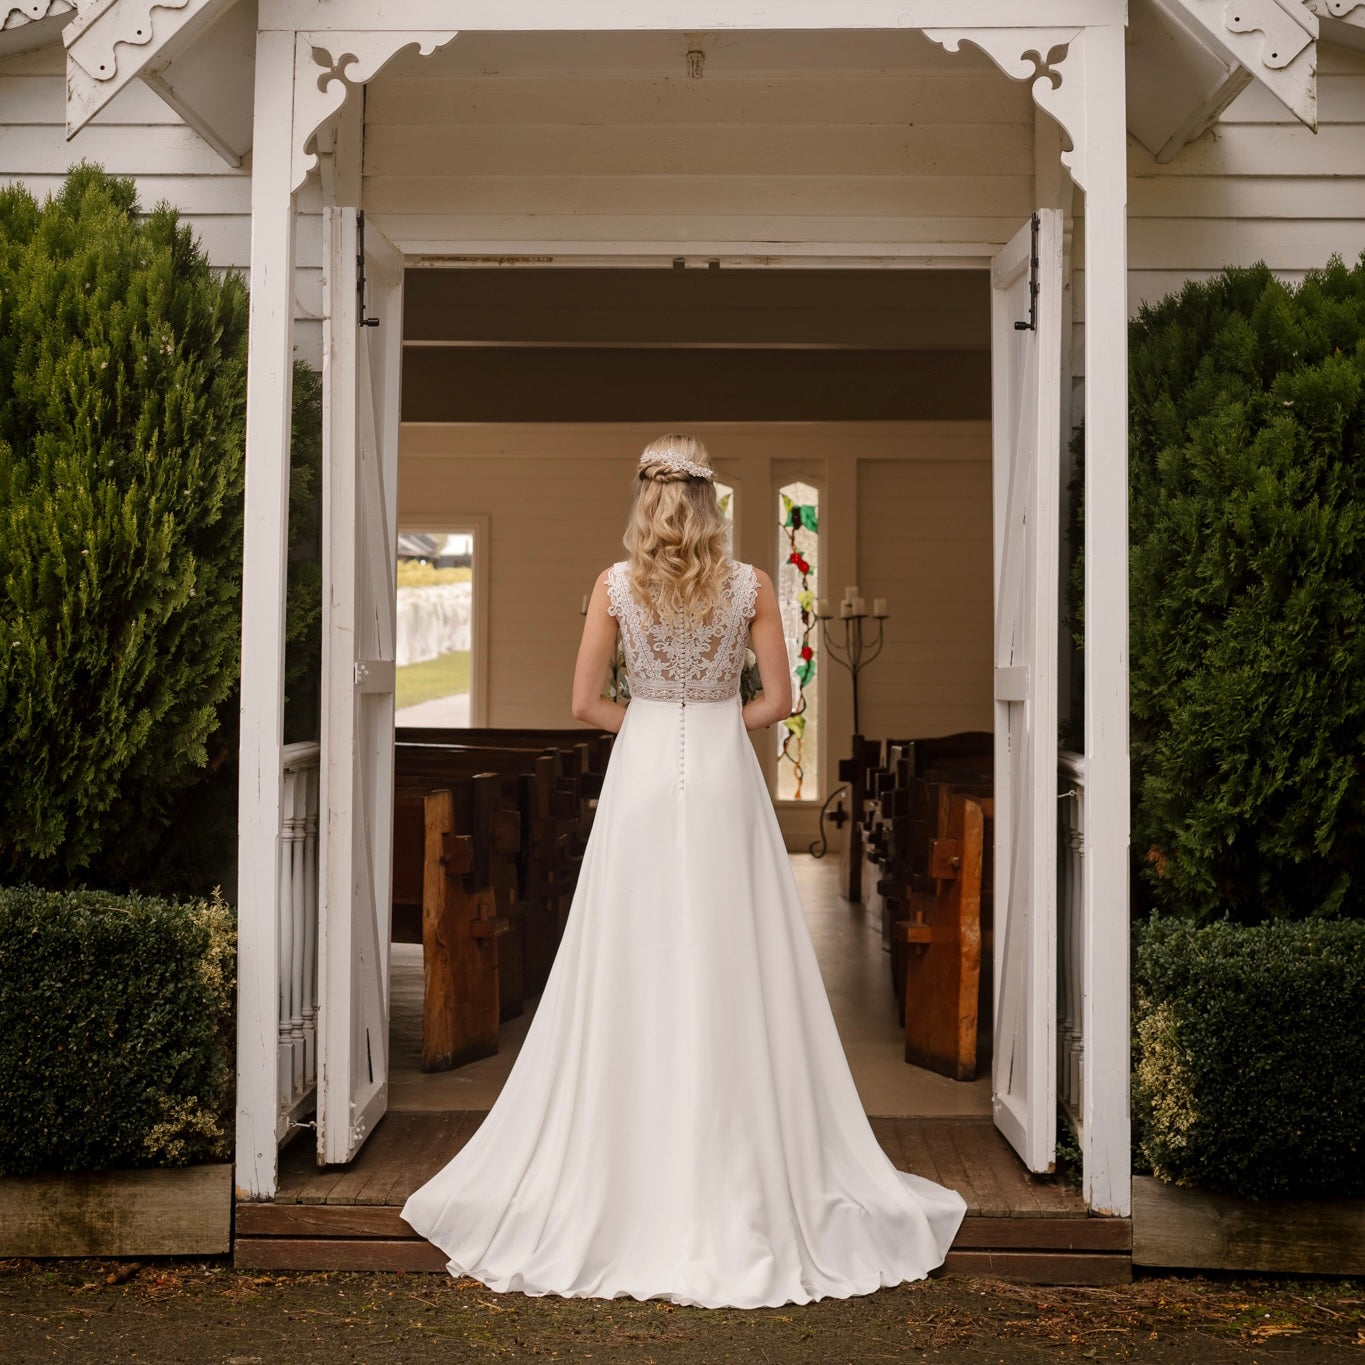 An elegant bride stands at the entrance of a charming chapel, poised in the Luna Wedding Gown. The dress features a plunging V-neckline with illusion mesh and form-fitting silhouette. The gown's smooth fabric cascades into a graceful chapel train, while the bride holds a bouquet of soft-colored flowers, completing her timeless bridal look.